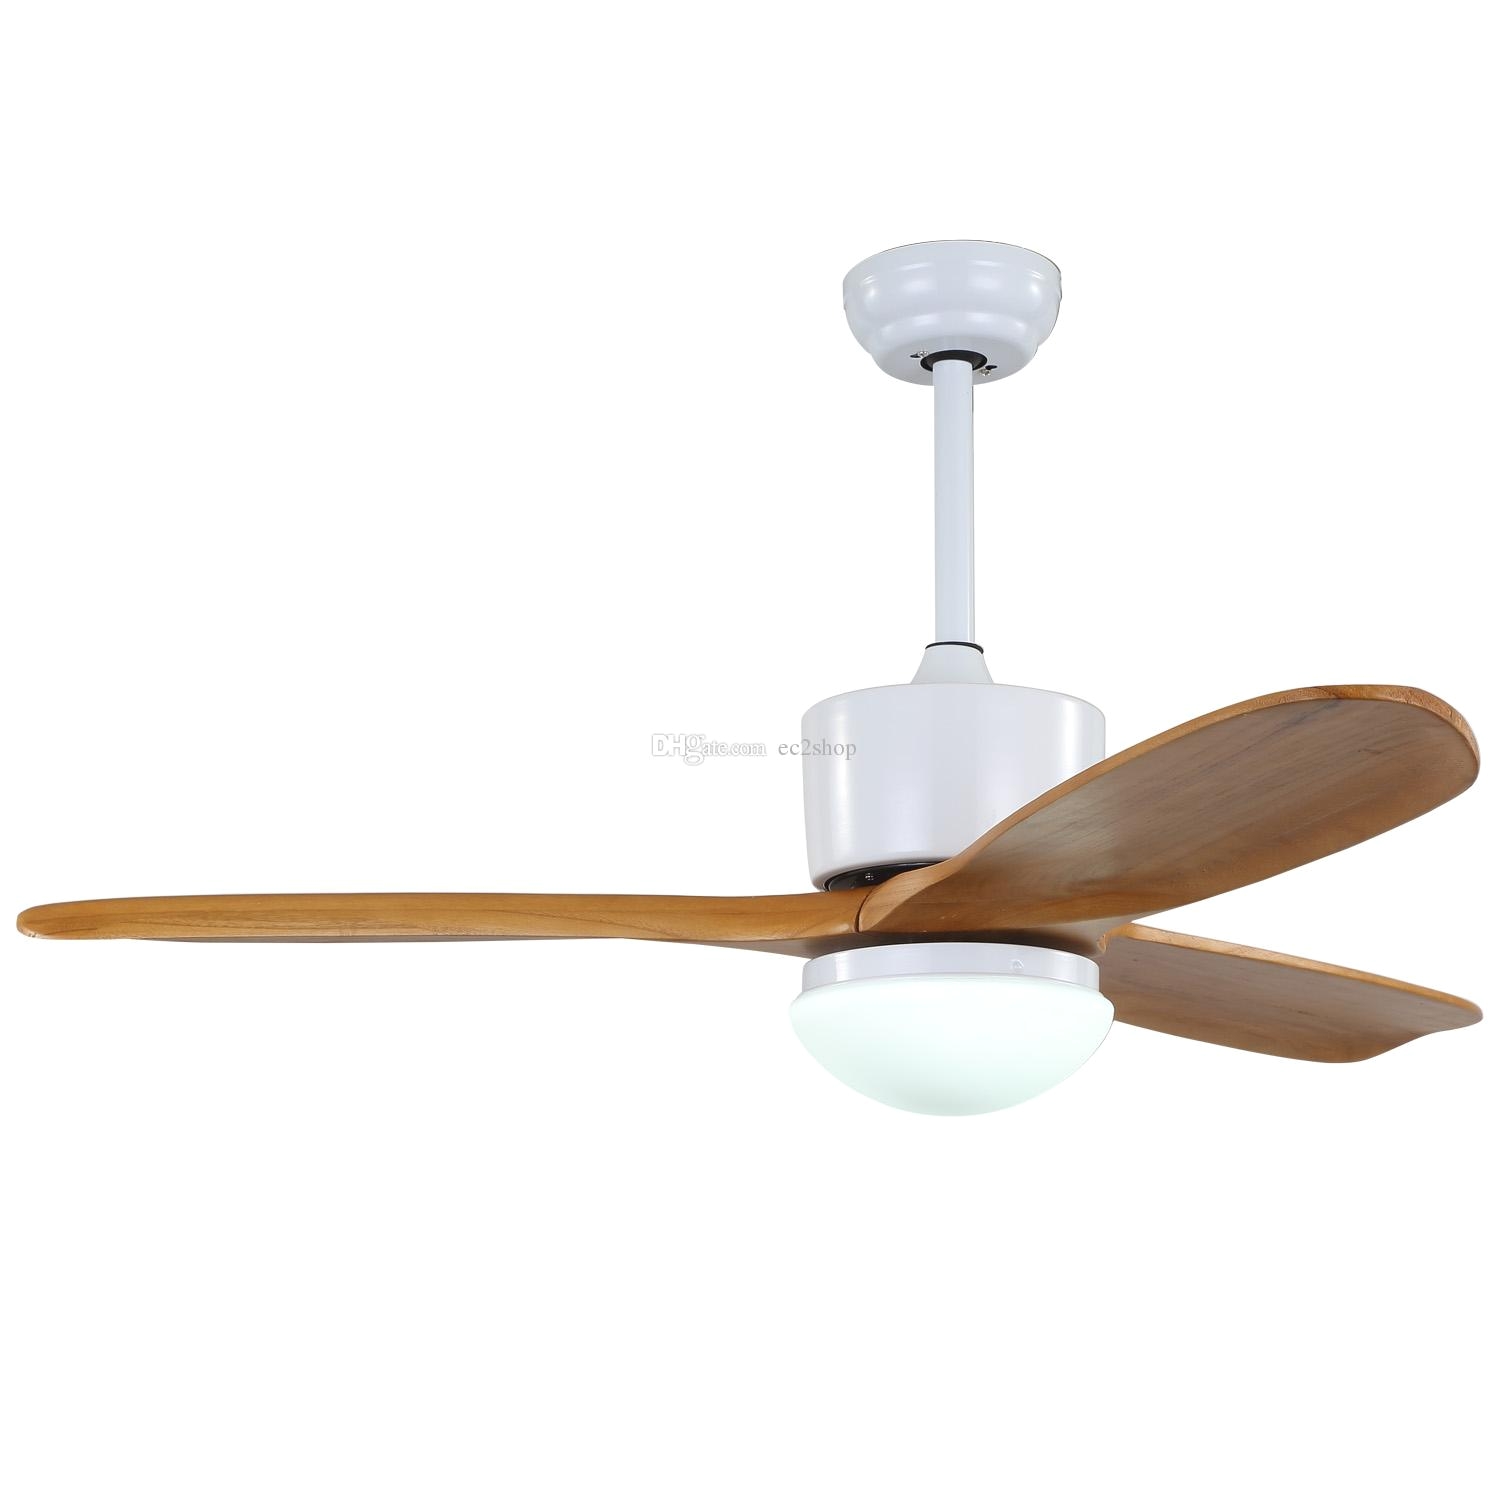 2018 china 48 inch best ceiling fan with light and remote control ac dc for bedroom living room on sale from ec2shop 12 07 dhgate com